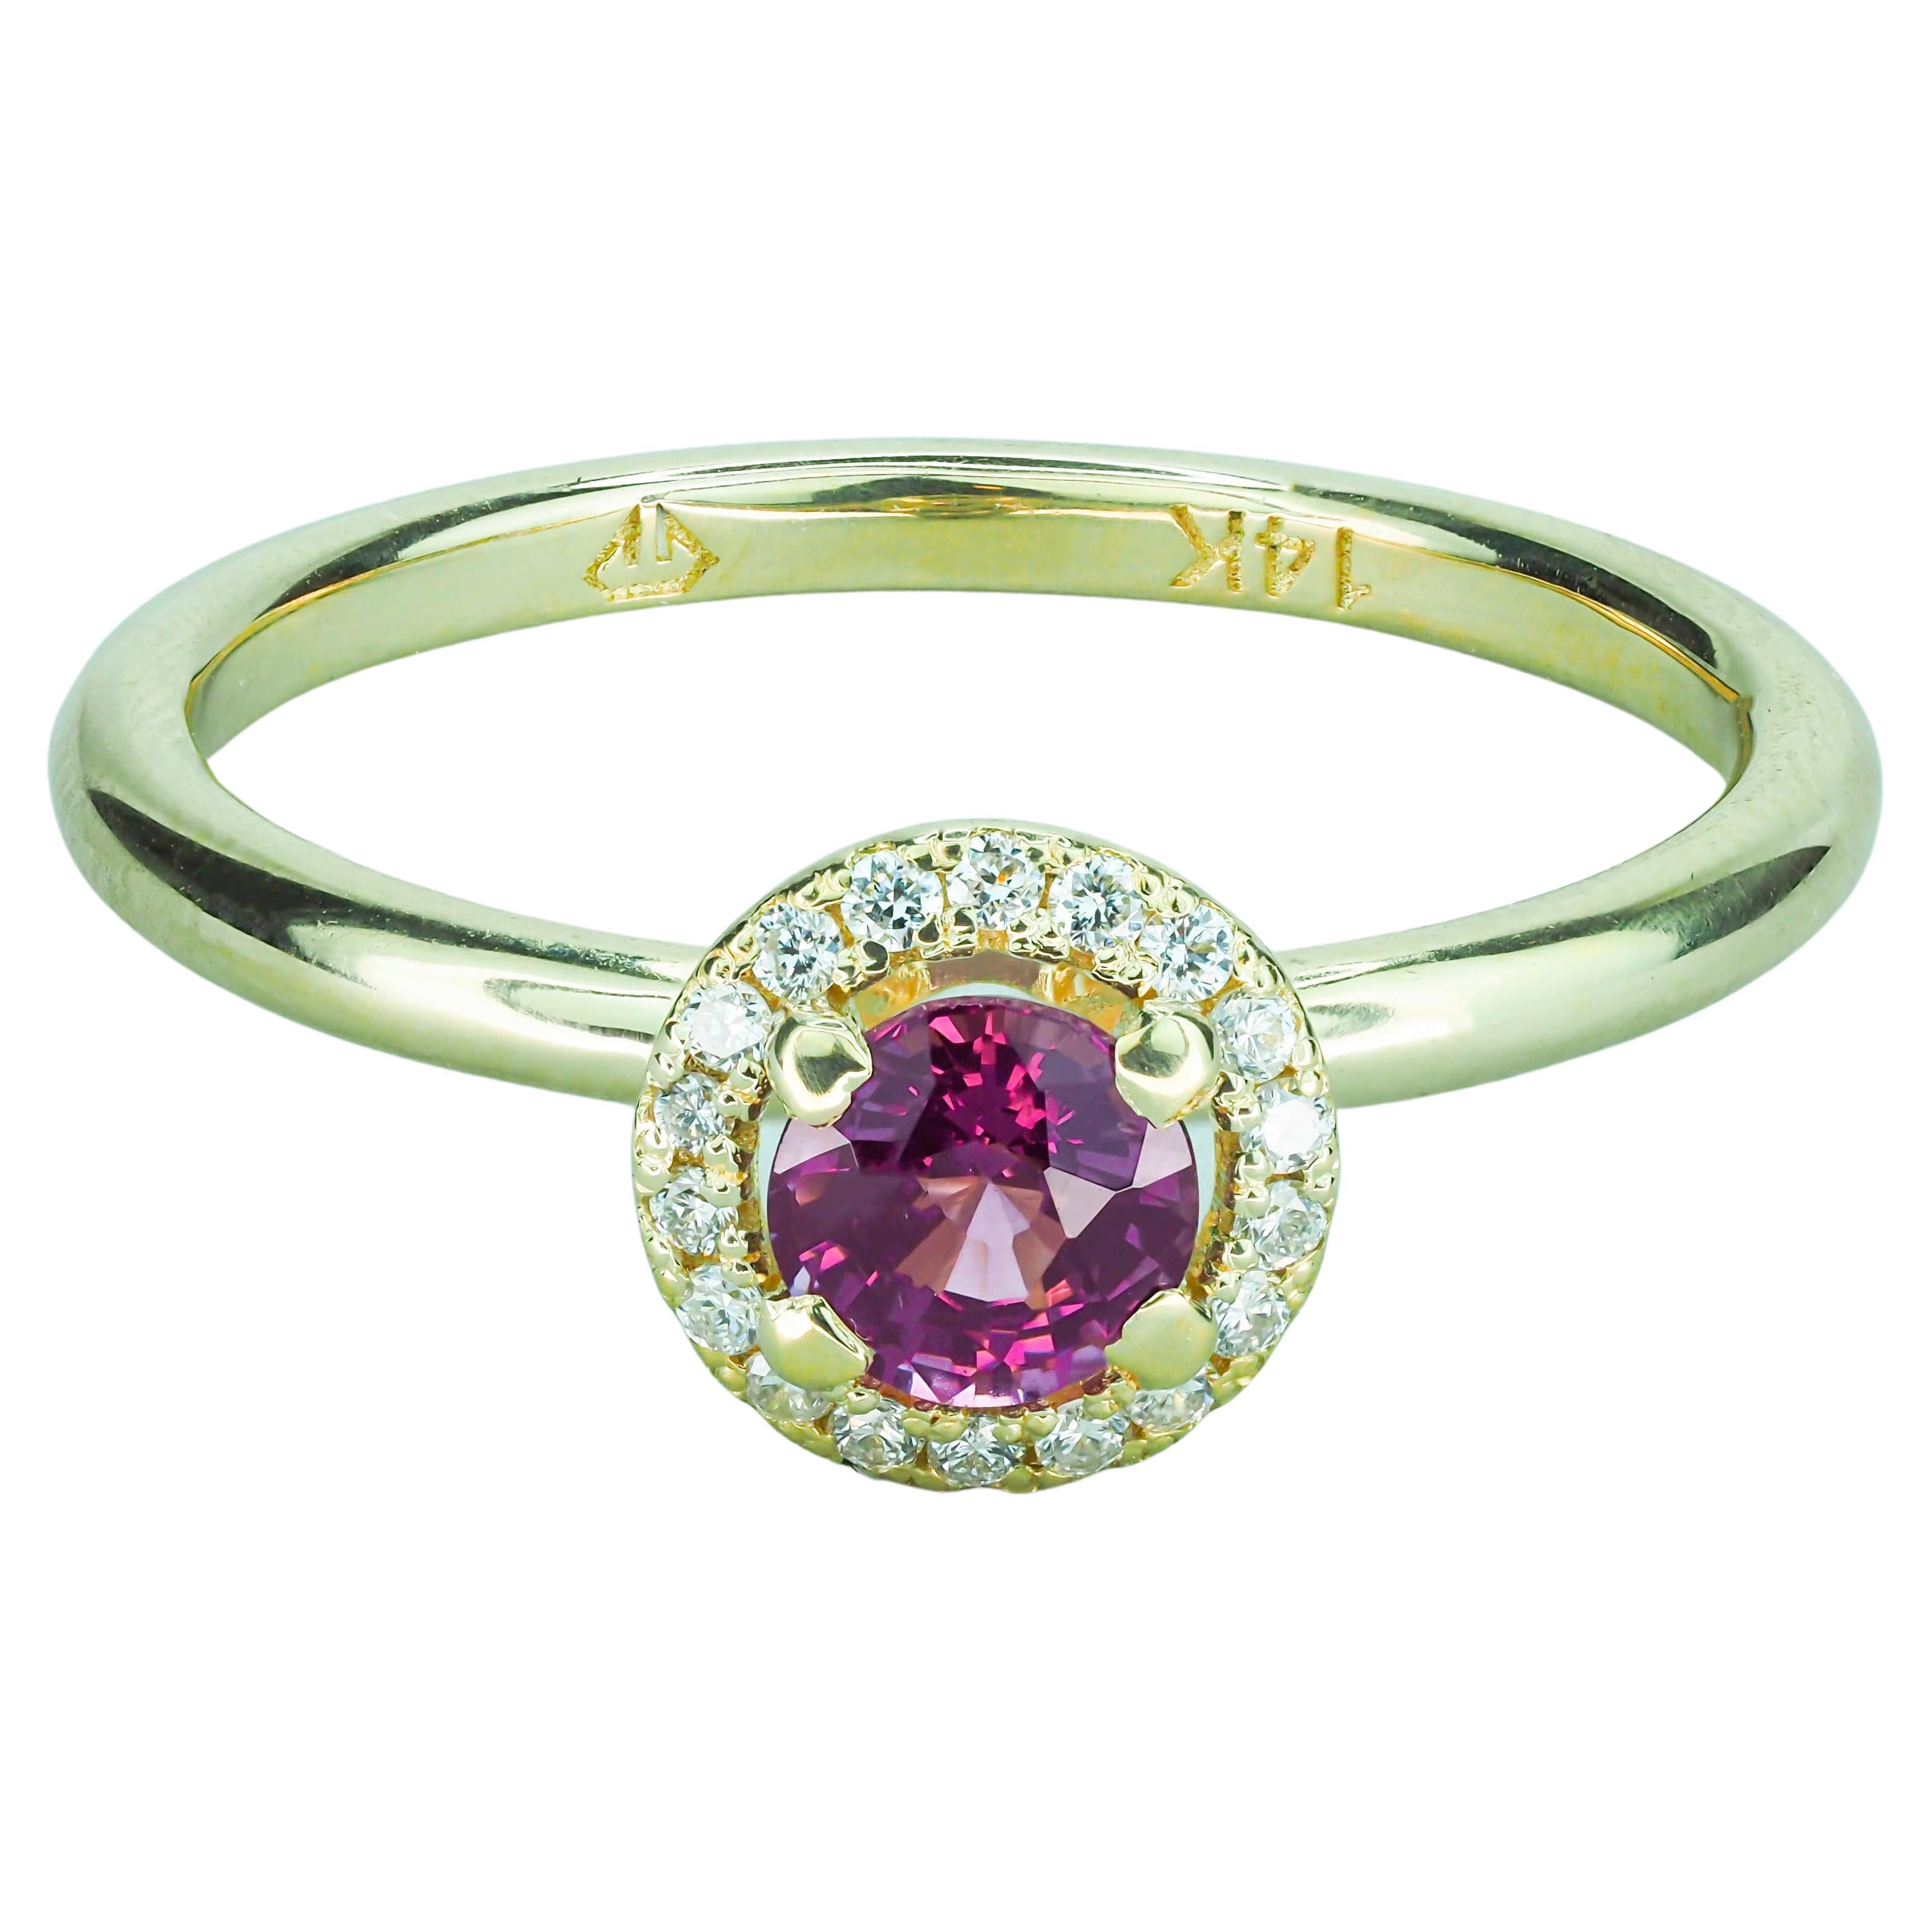 For Sale:  14k Solid Gold Ring with Natural Spinel and Diamonds